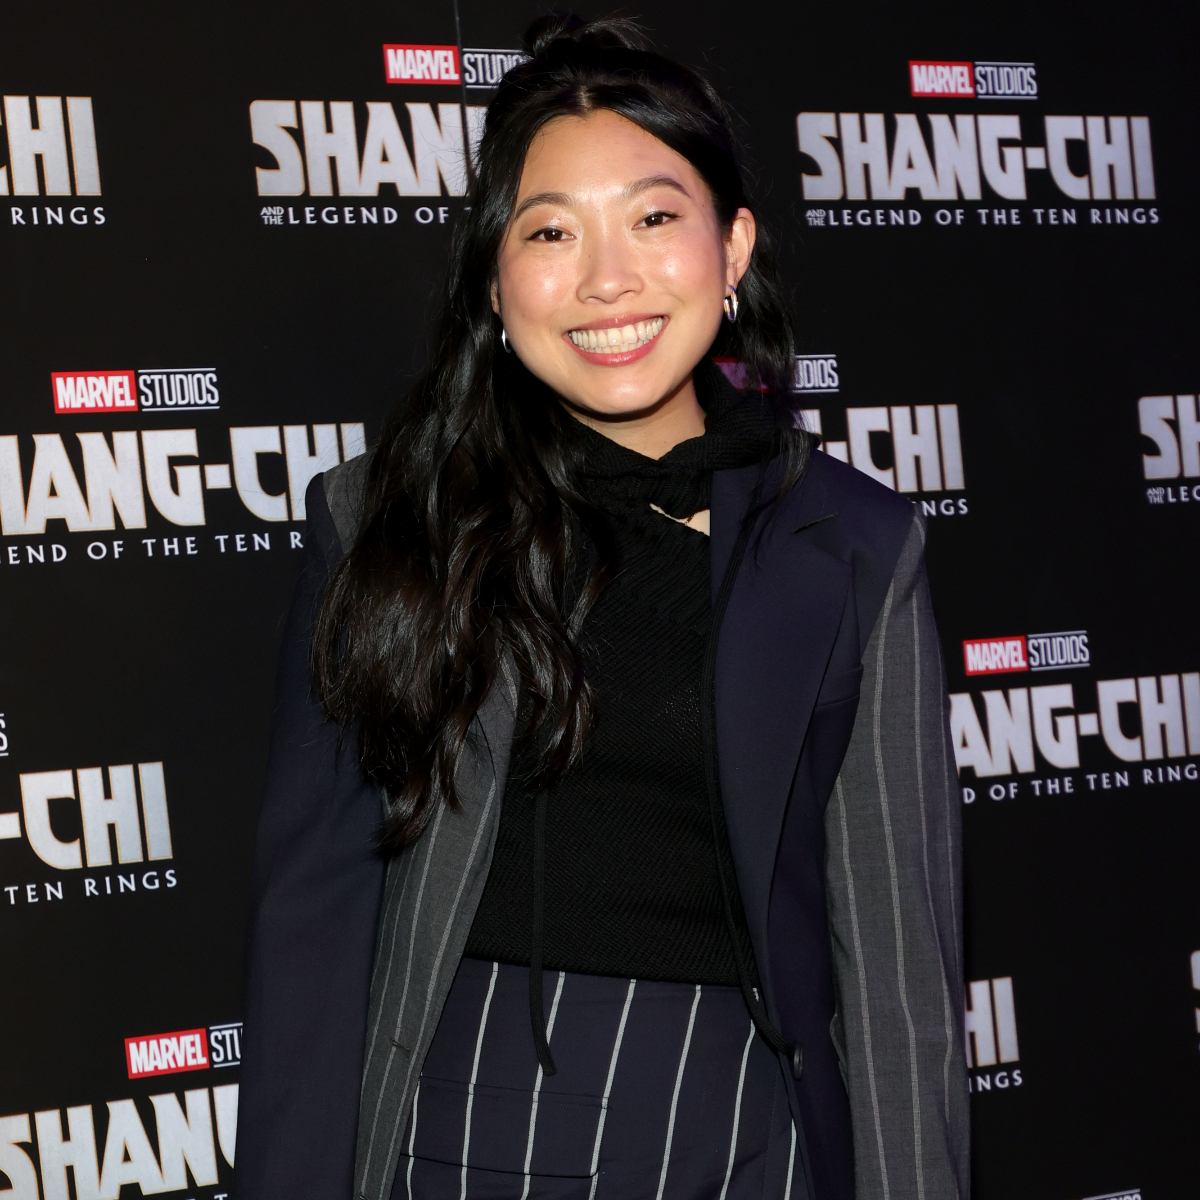 EXCLUSIVE: Shang-Chi's Awkwafina on excitement over her MCU future & building 'organic' equation with Simu Liu